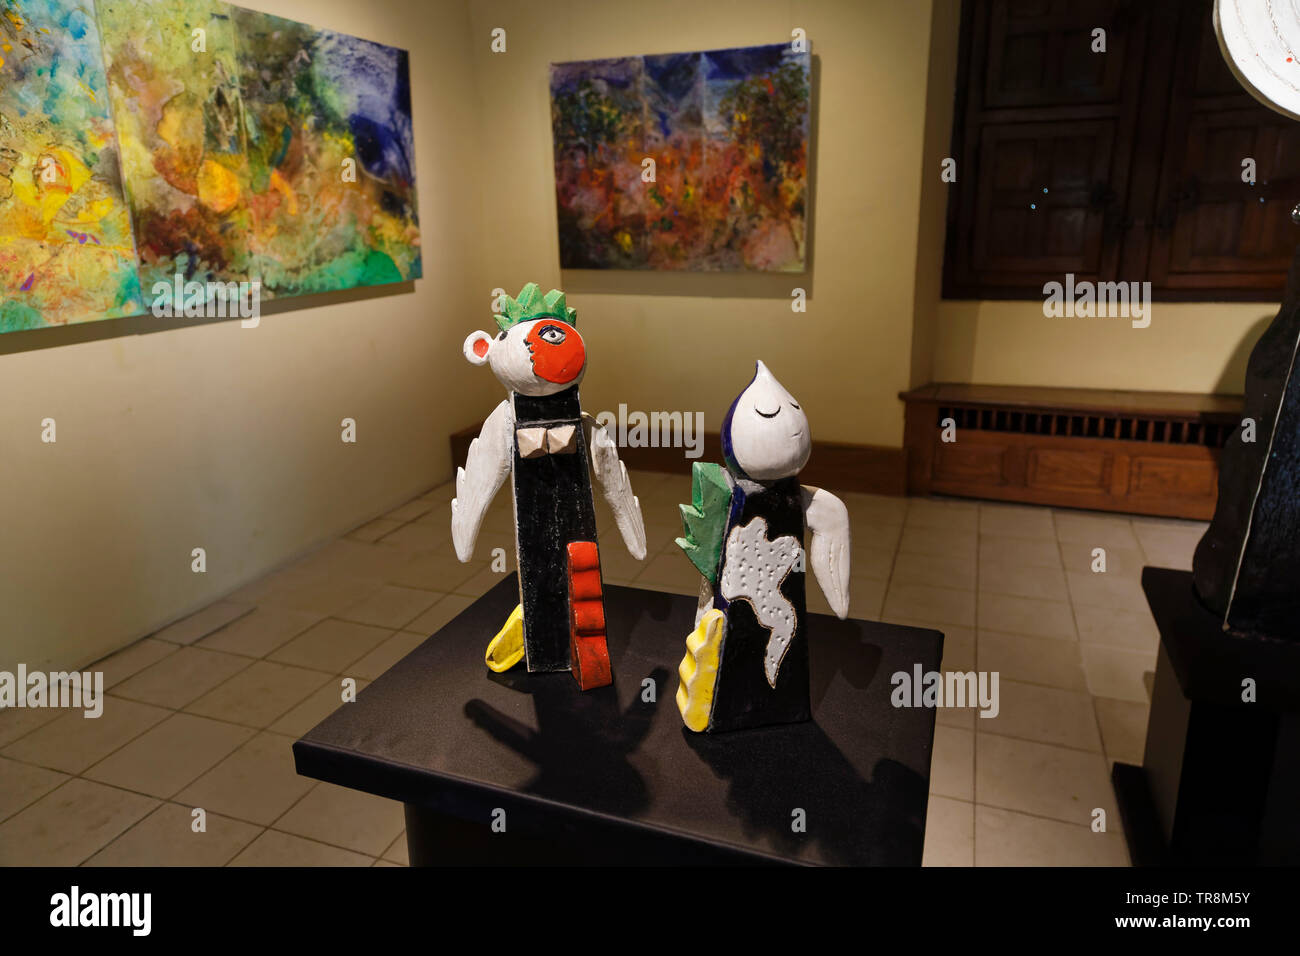 Tours,France.24th May,2019.The Jacky Coville Sculptures presented at the Exhibition Renaissance(s) of the Capazza Gallery in Tours, France Stock Photo